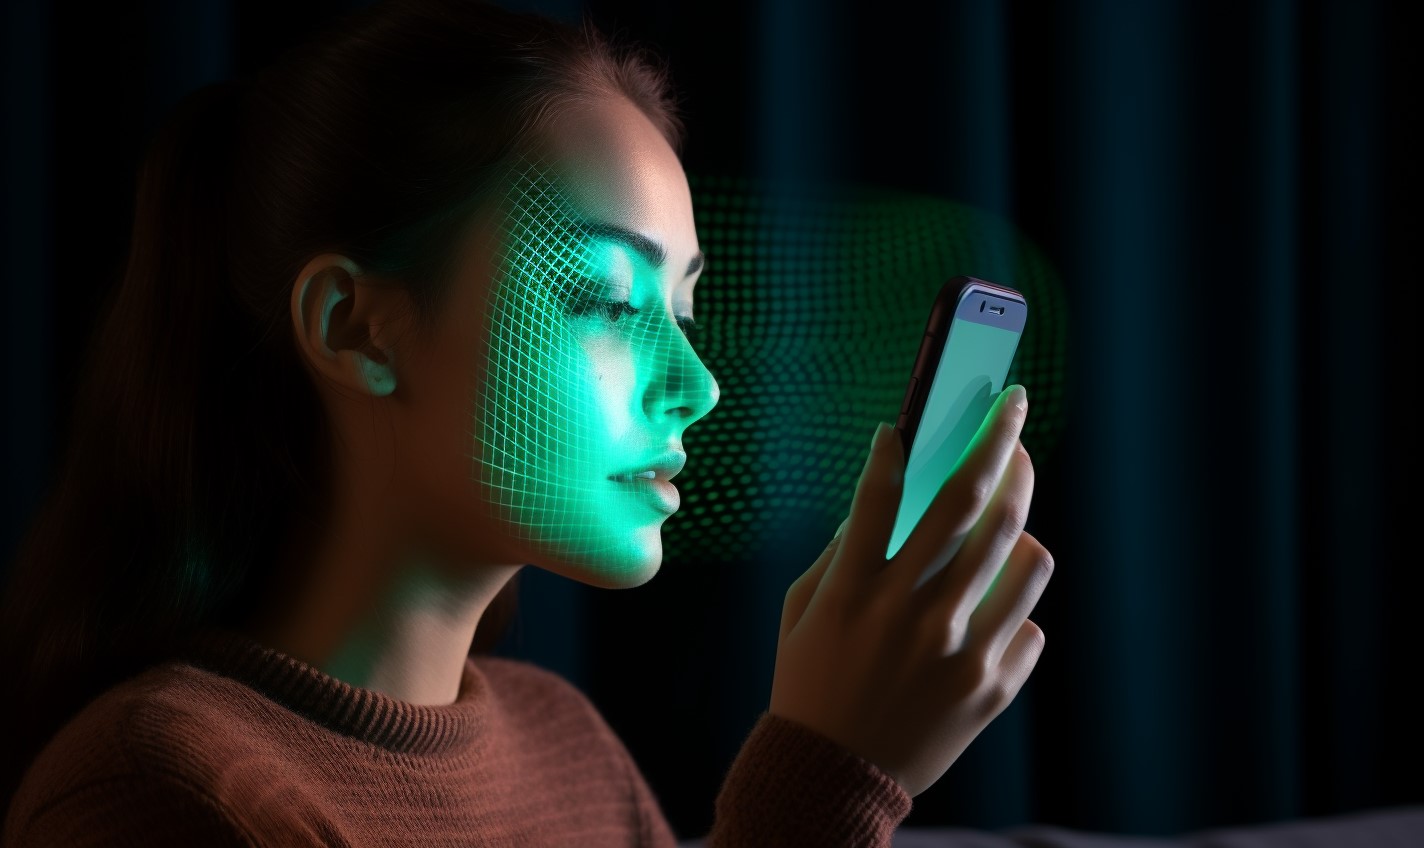 Is Your Face ID Not Working? Here Are Some Quick Solutions